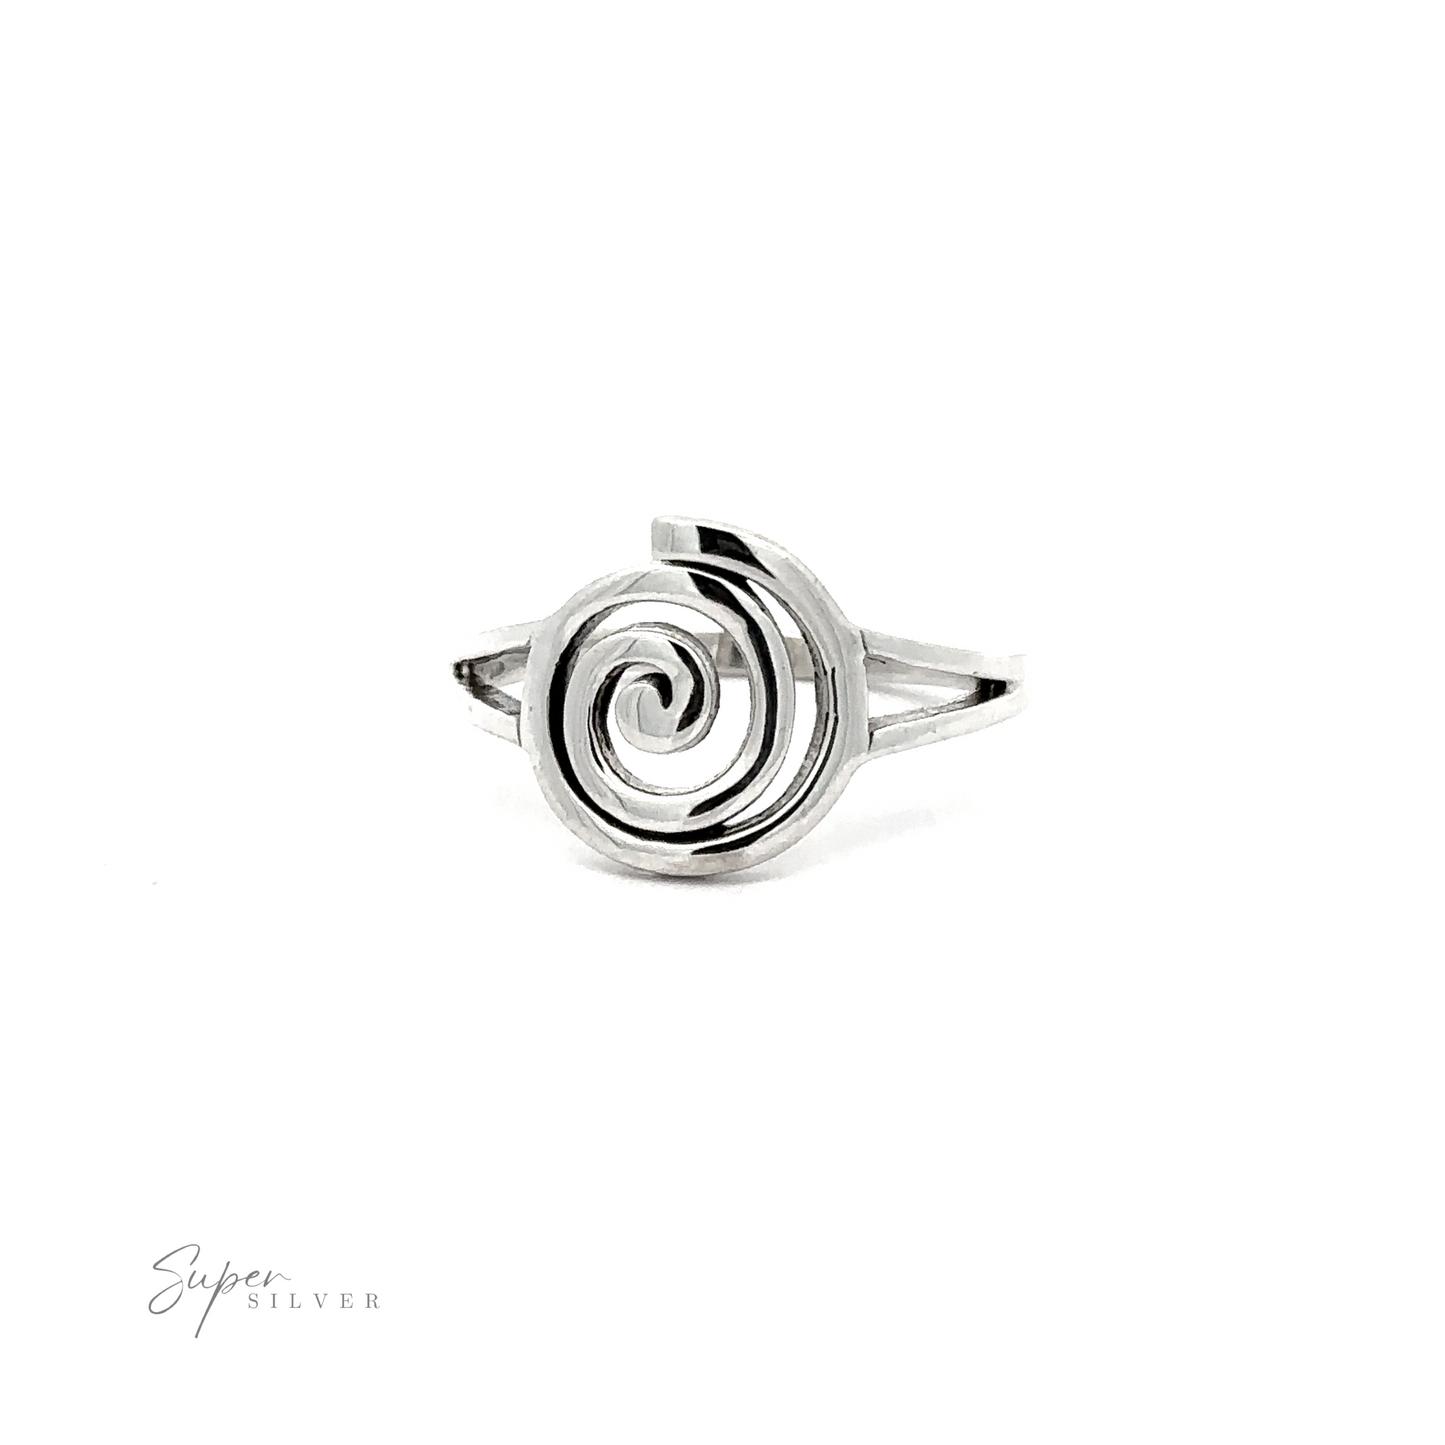 A .925 Sterling Silver Spiral Ring with Split Shank Band.